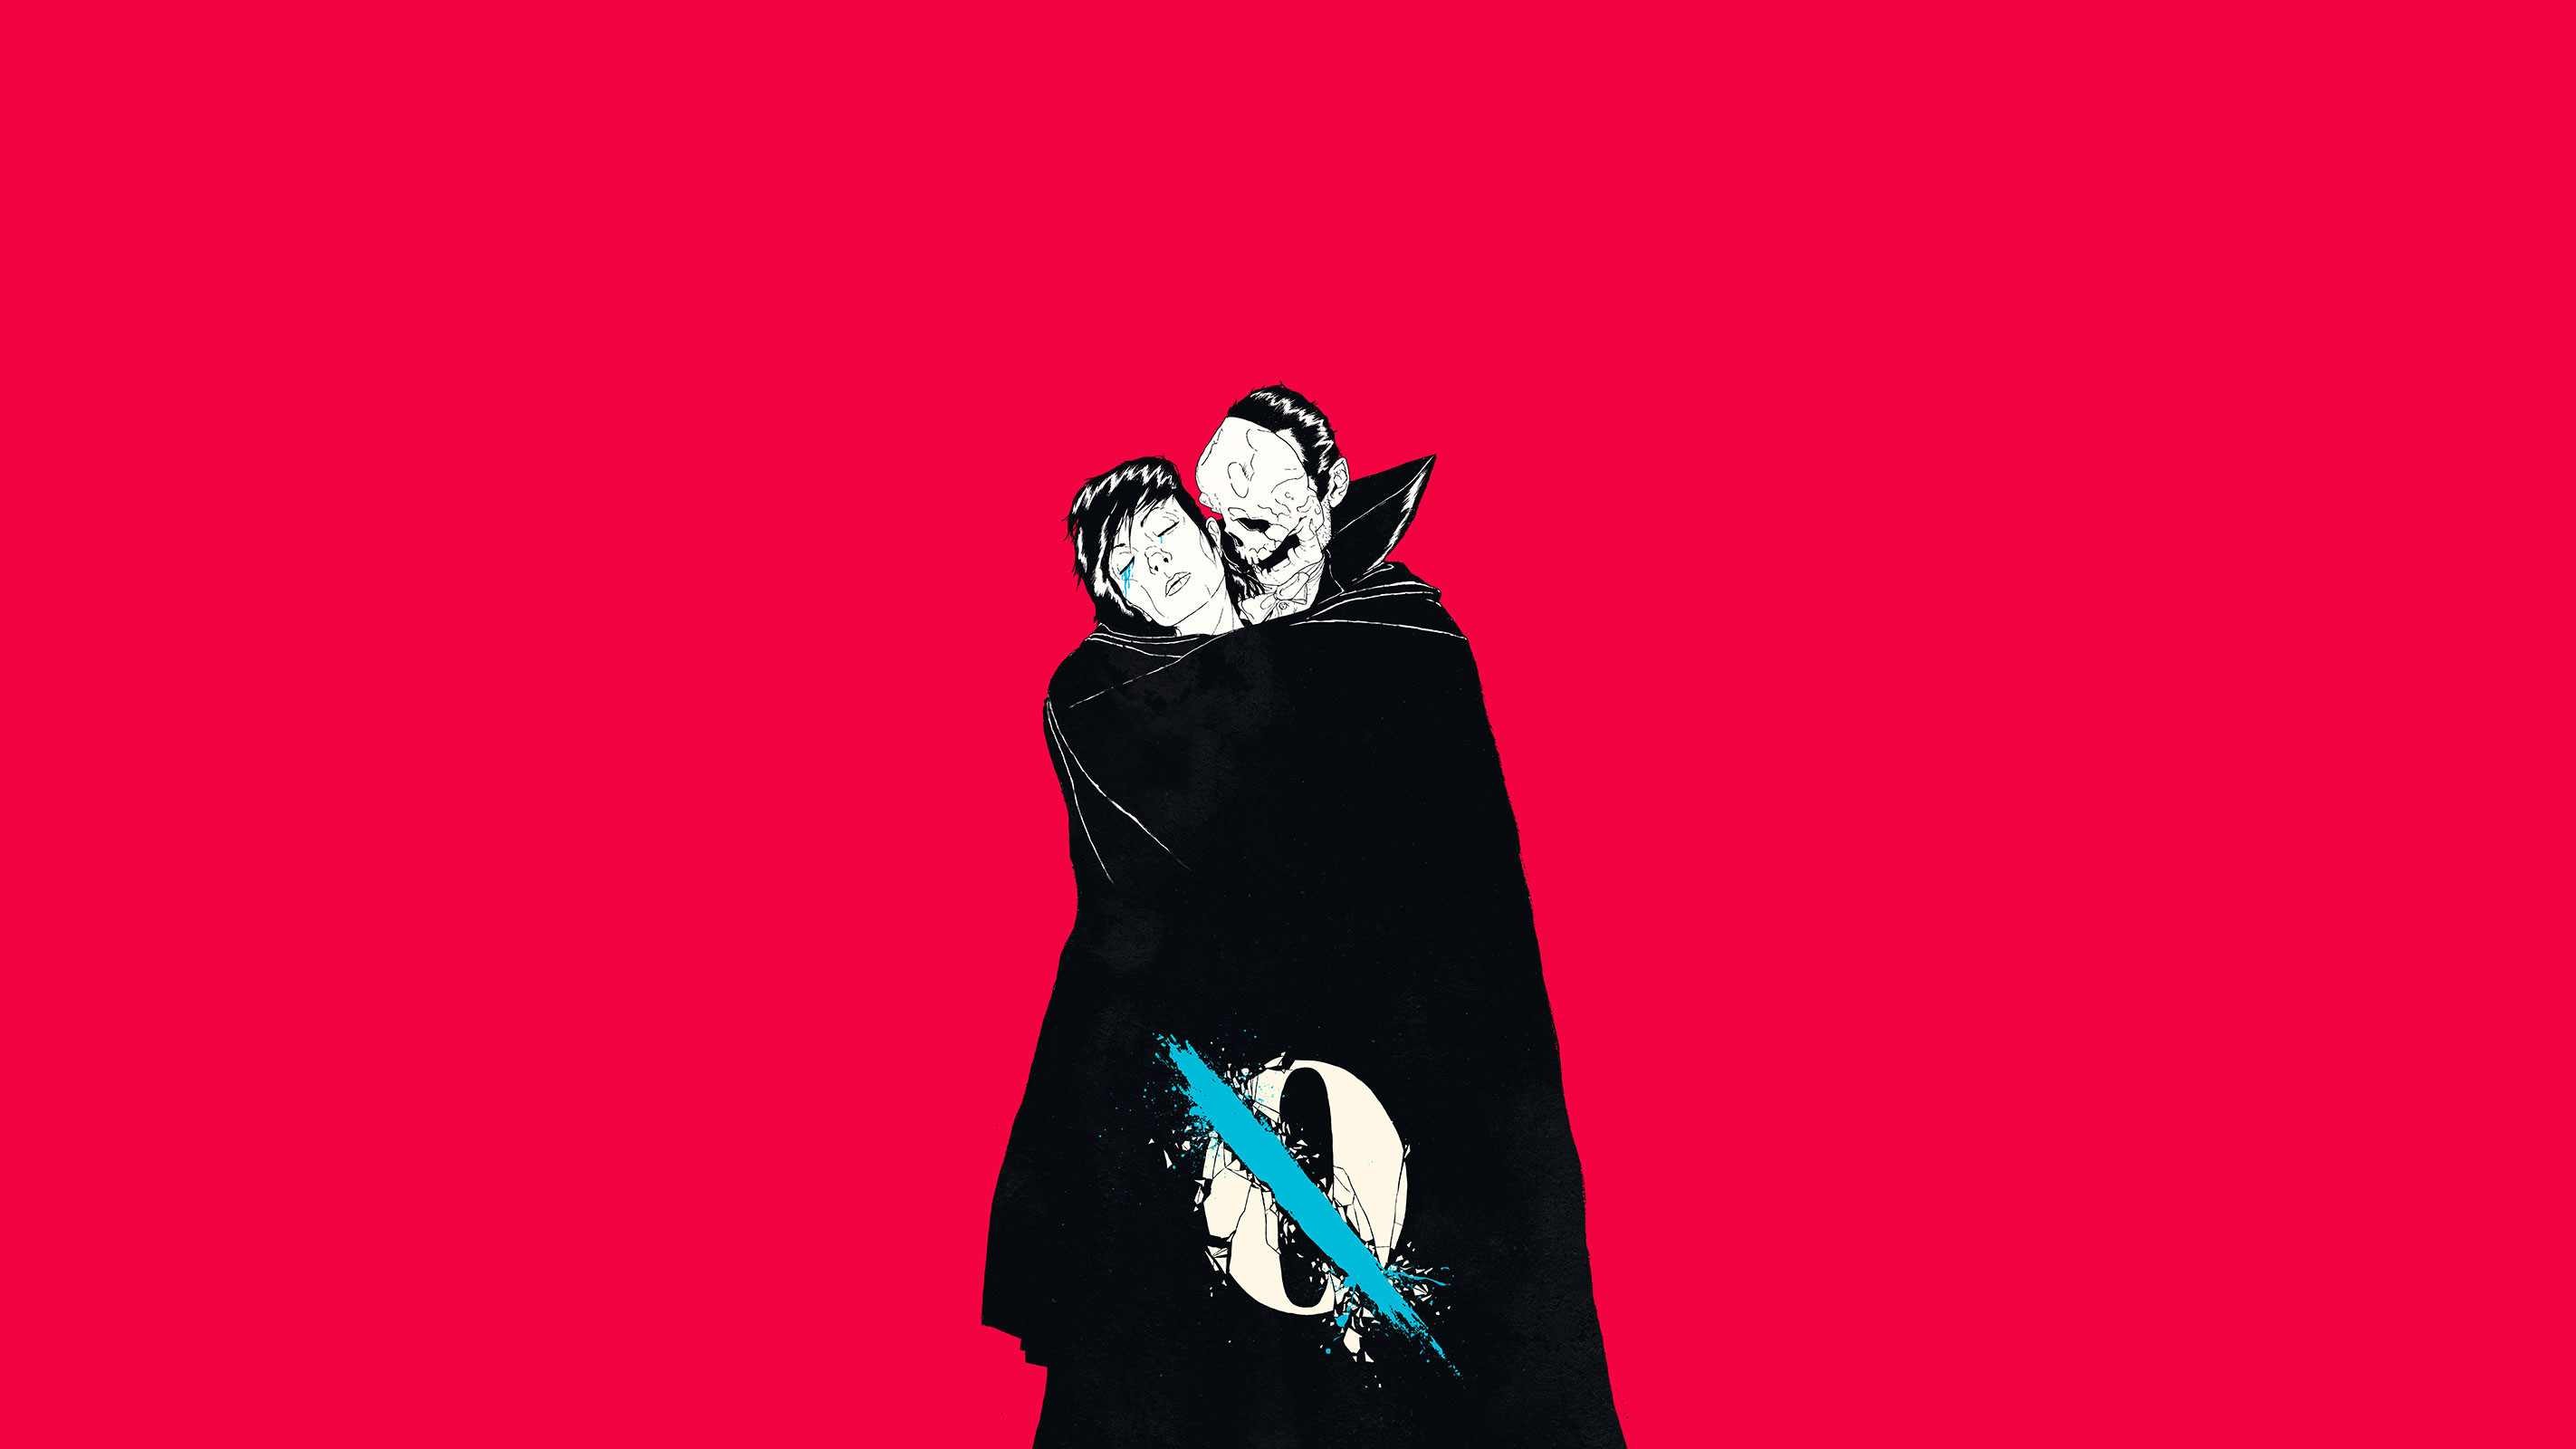 General 2845x1600 metal music Queens of the Stone Age album covers red red background skull music simple background